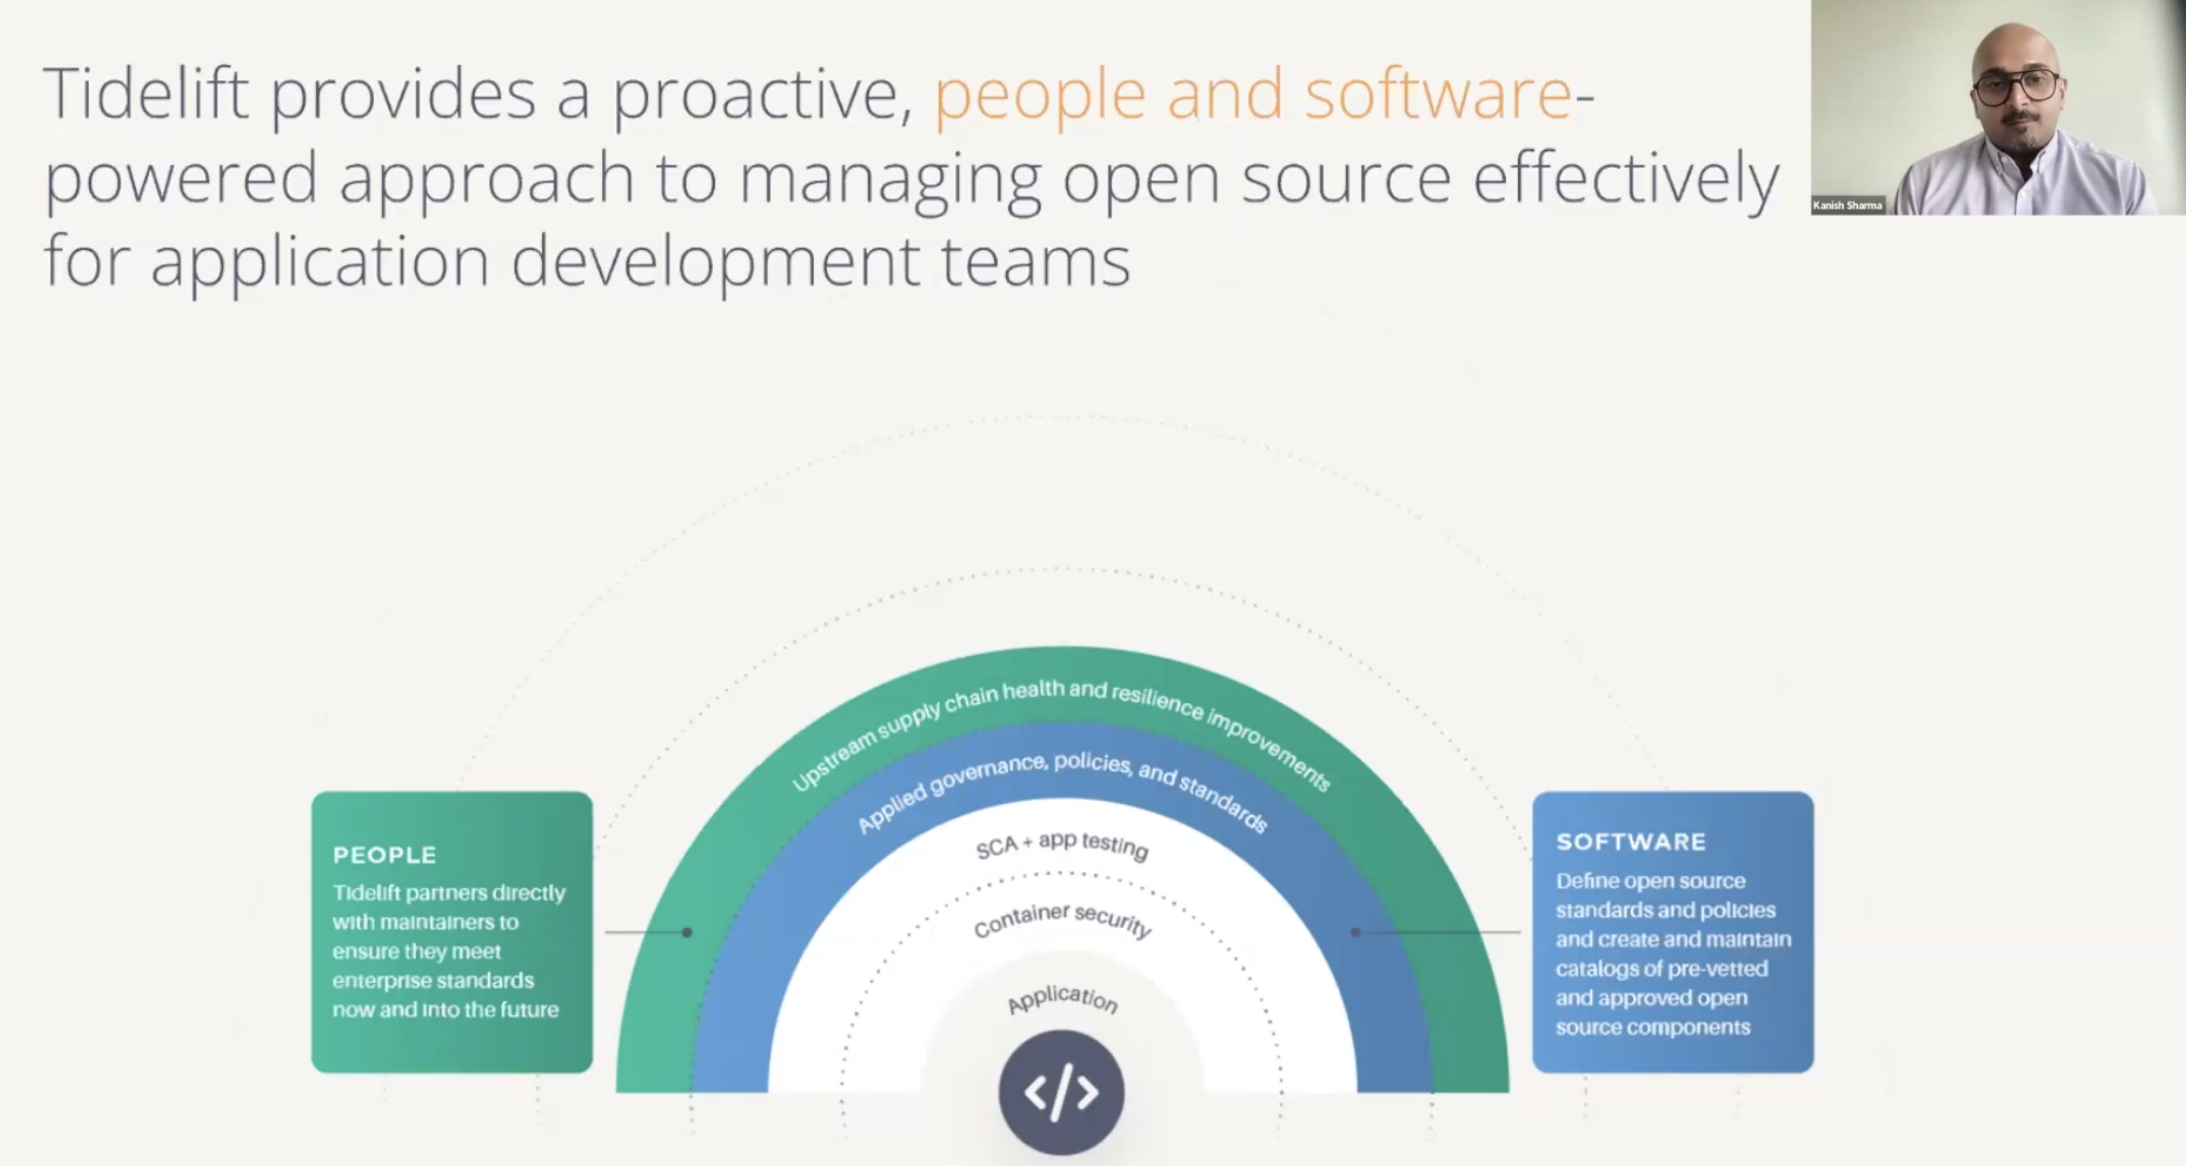 Tidelift's proactive, people and software-powered approach to managing open source effectively